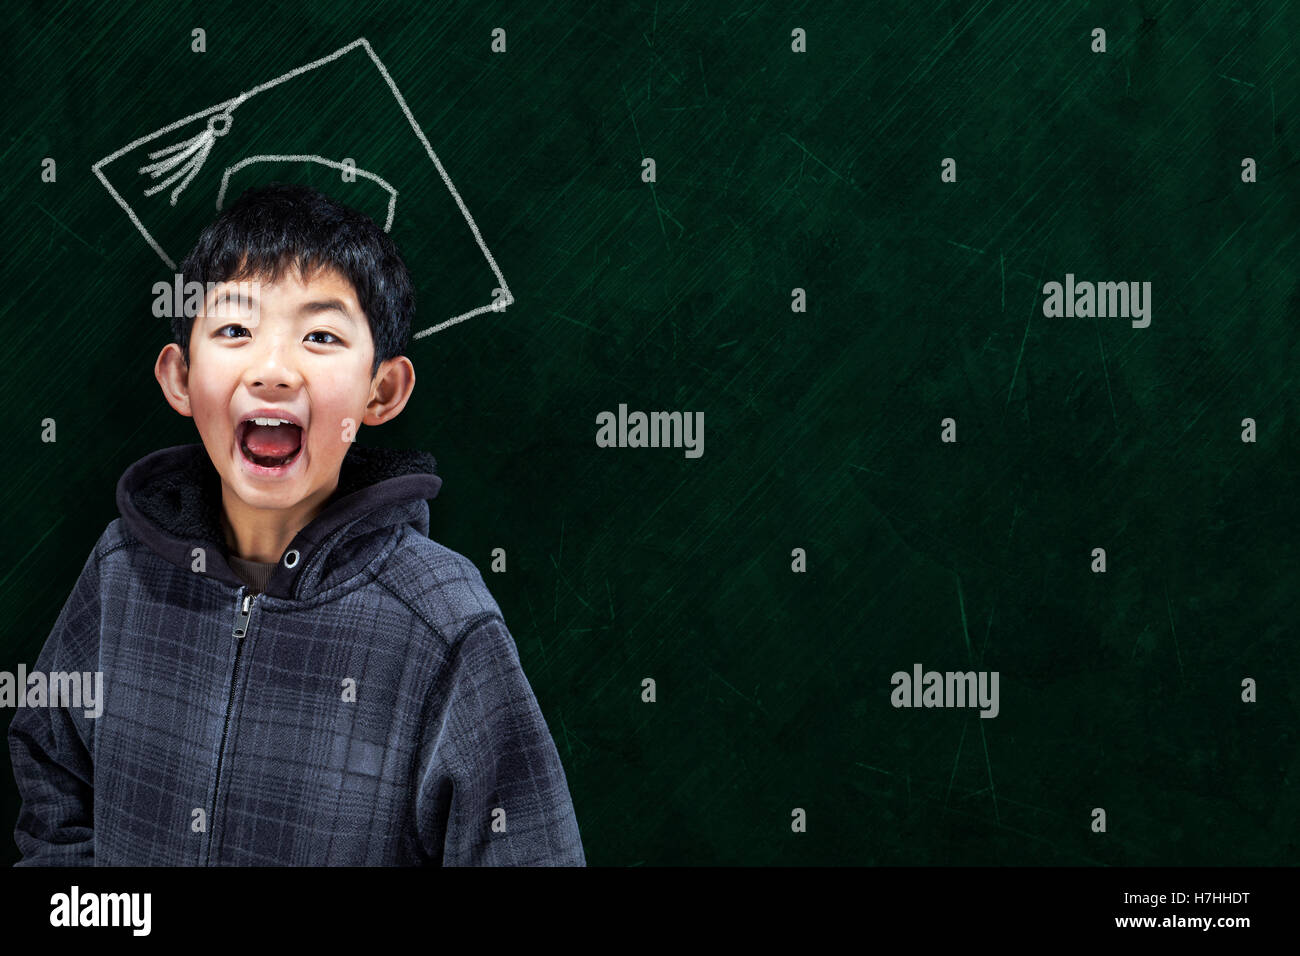 Jubilent Asian boy in classroom setting with graduate hat on chalkboard background and copy space. Concept for university educat Stock Photo